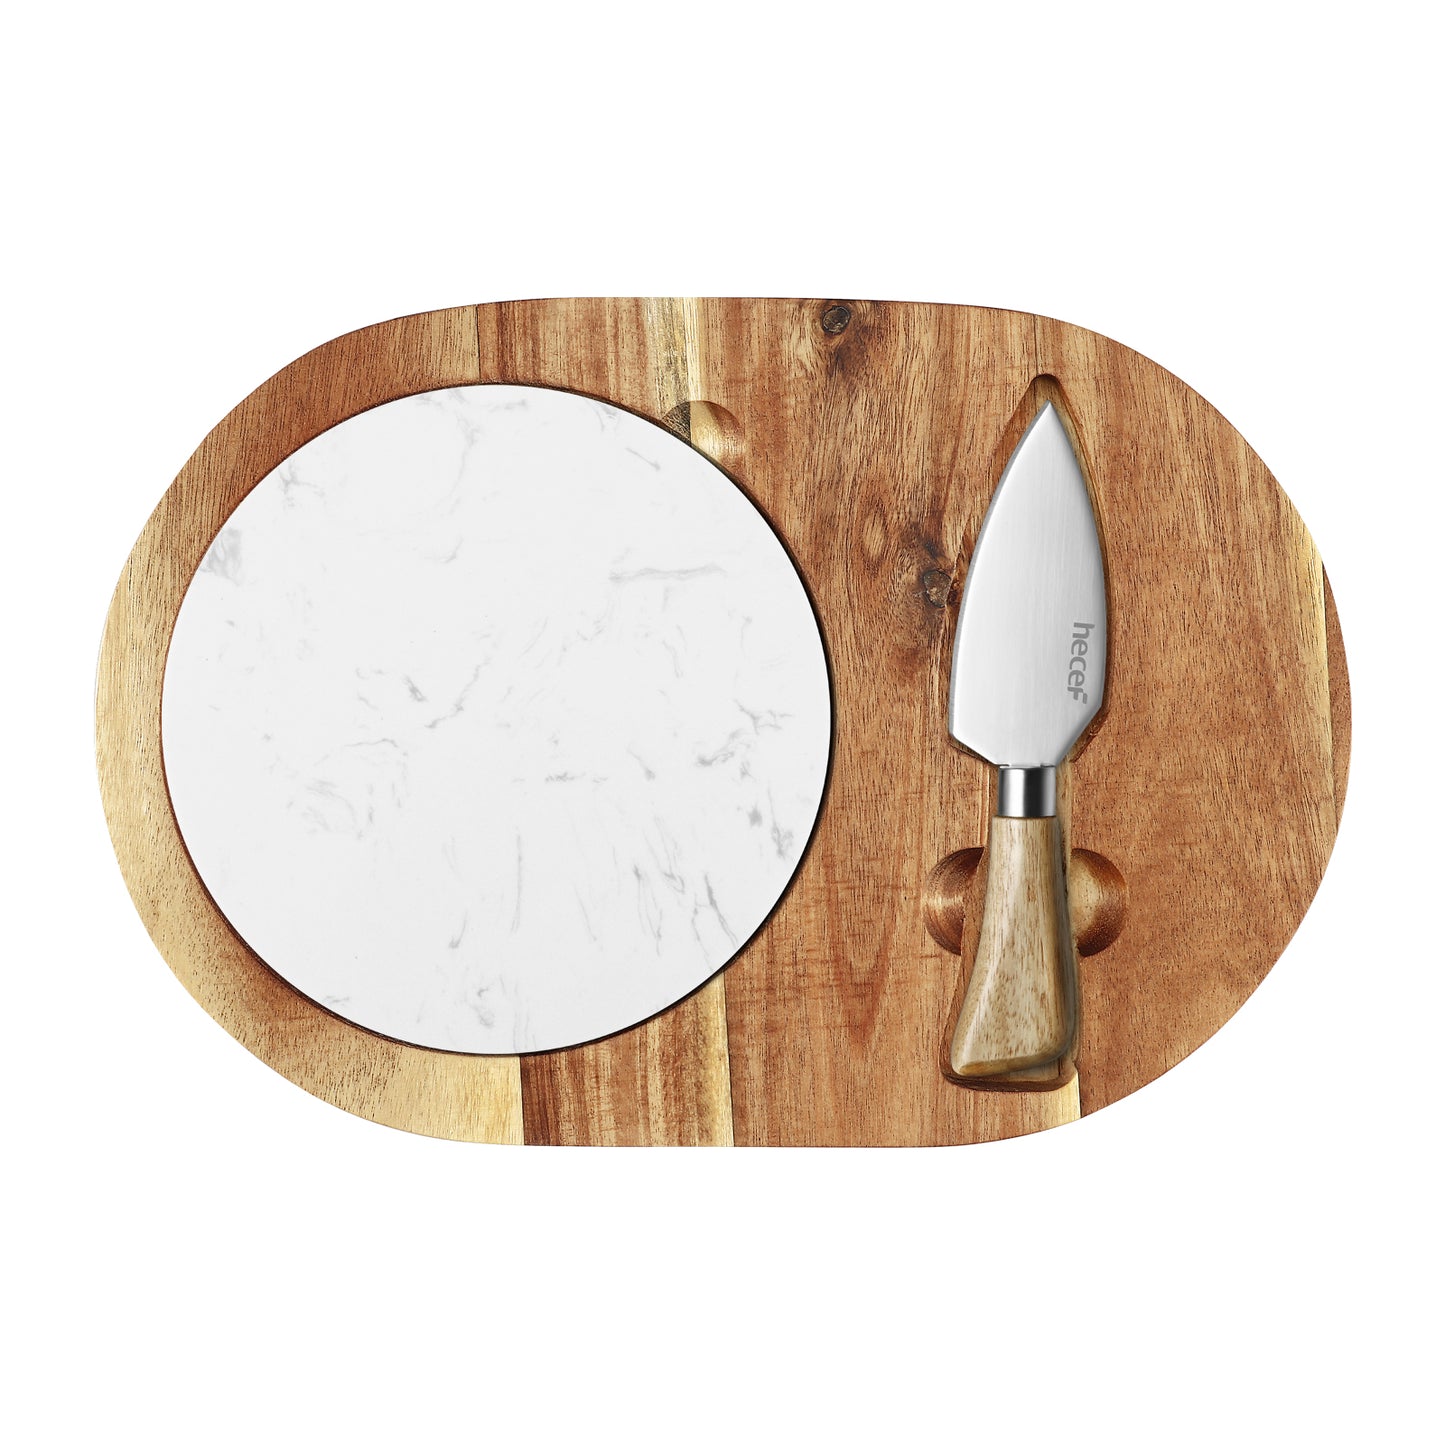 Hecef Oval Acacia Wood Cheese Board Gift Set with White Marble & Knife - Hecef Kitchen